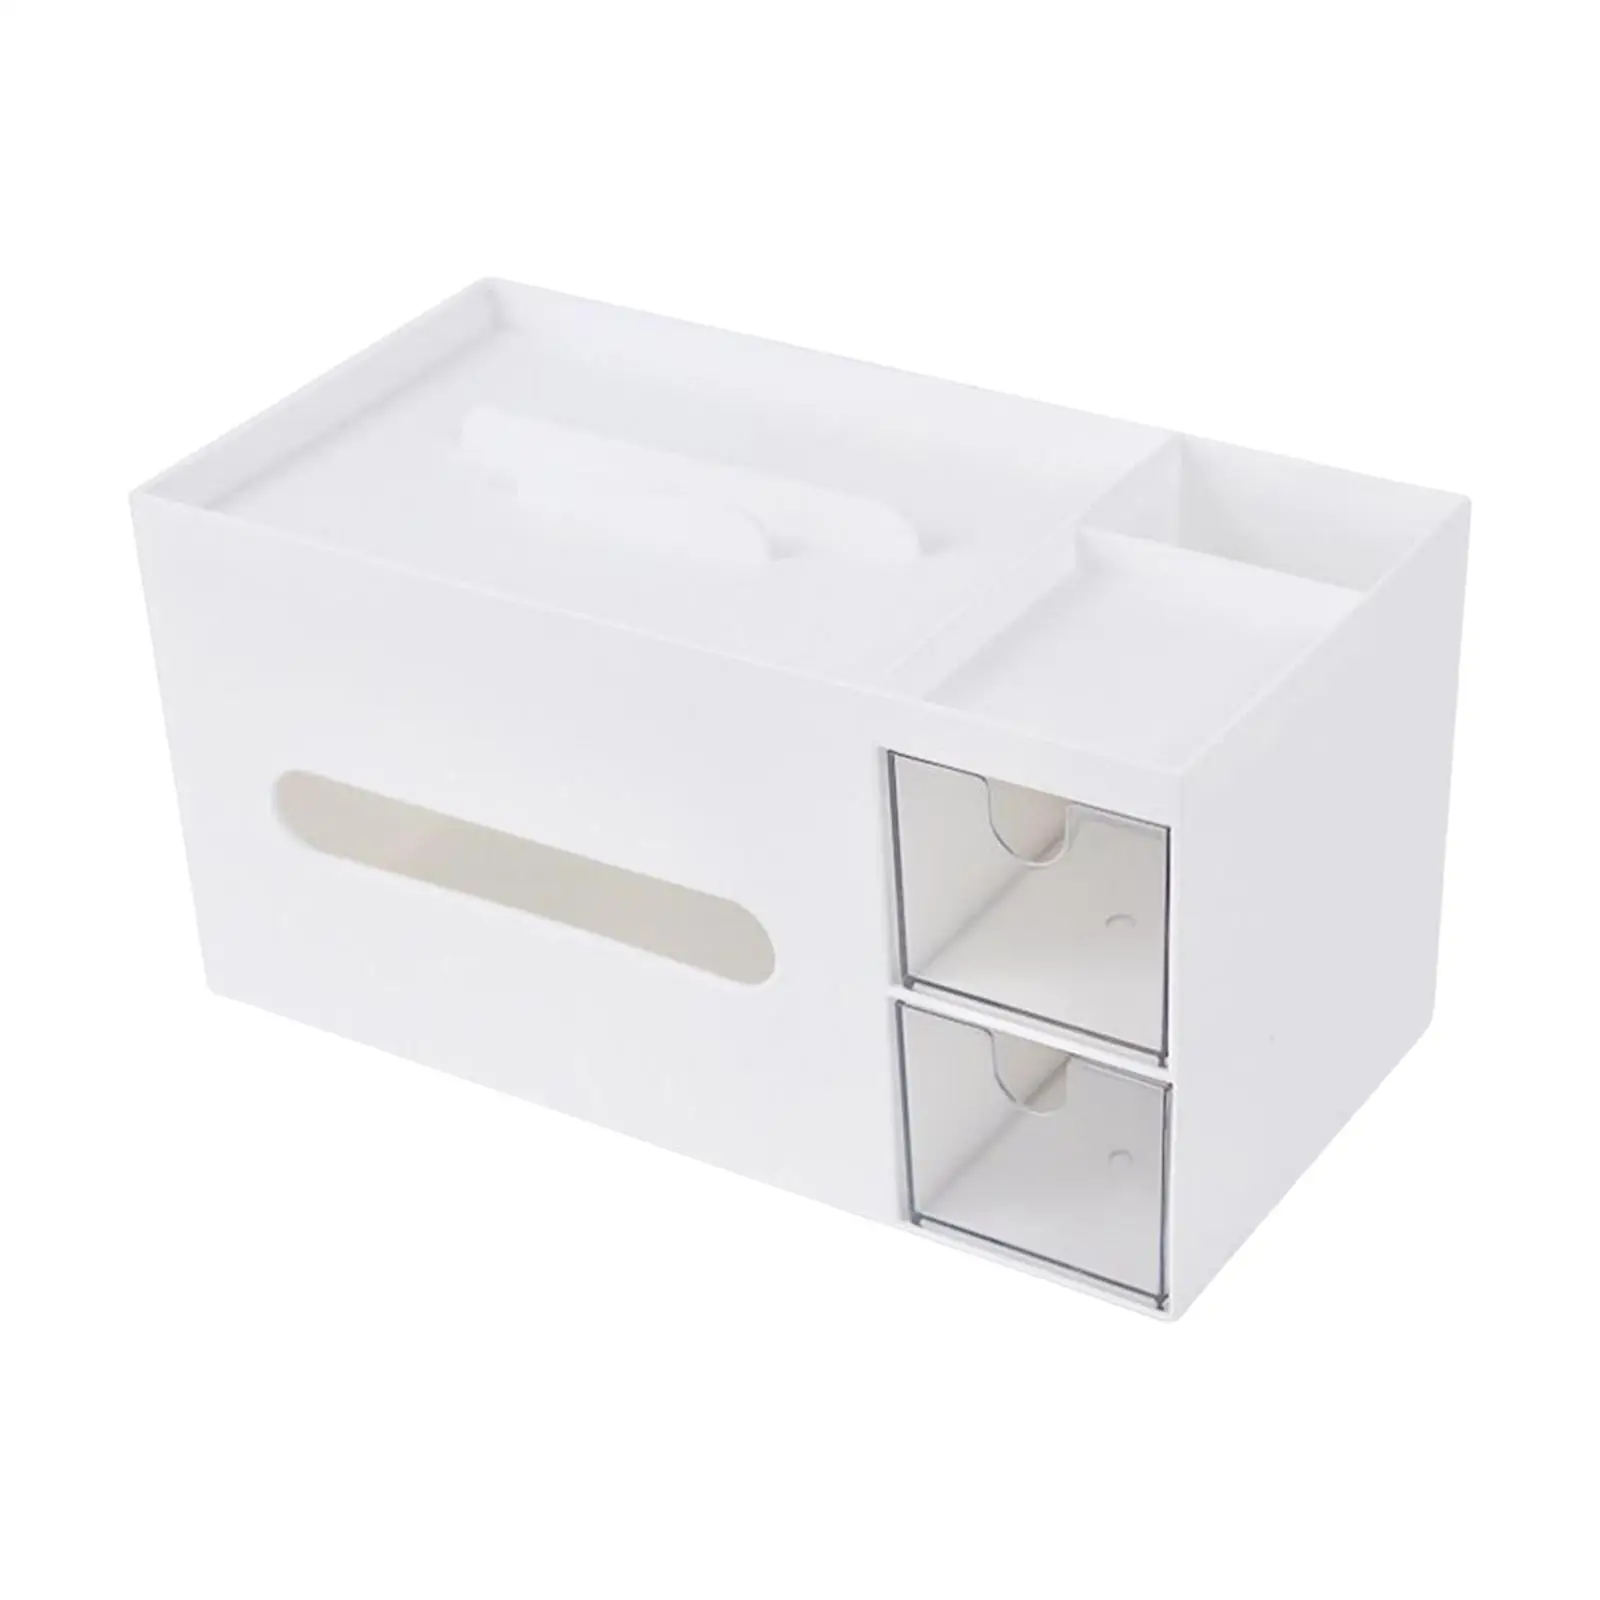 Tissue Box with Storage Compartment for Restaurant Dining Room Kitchen